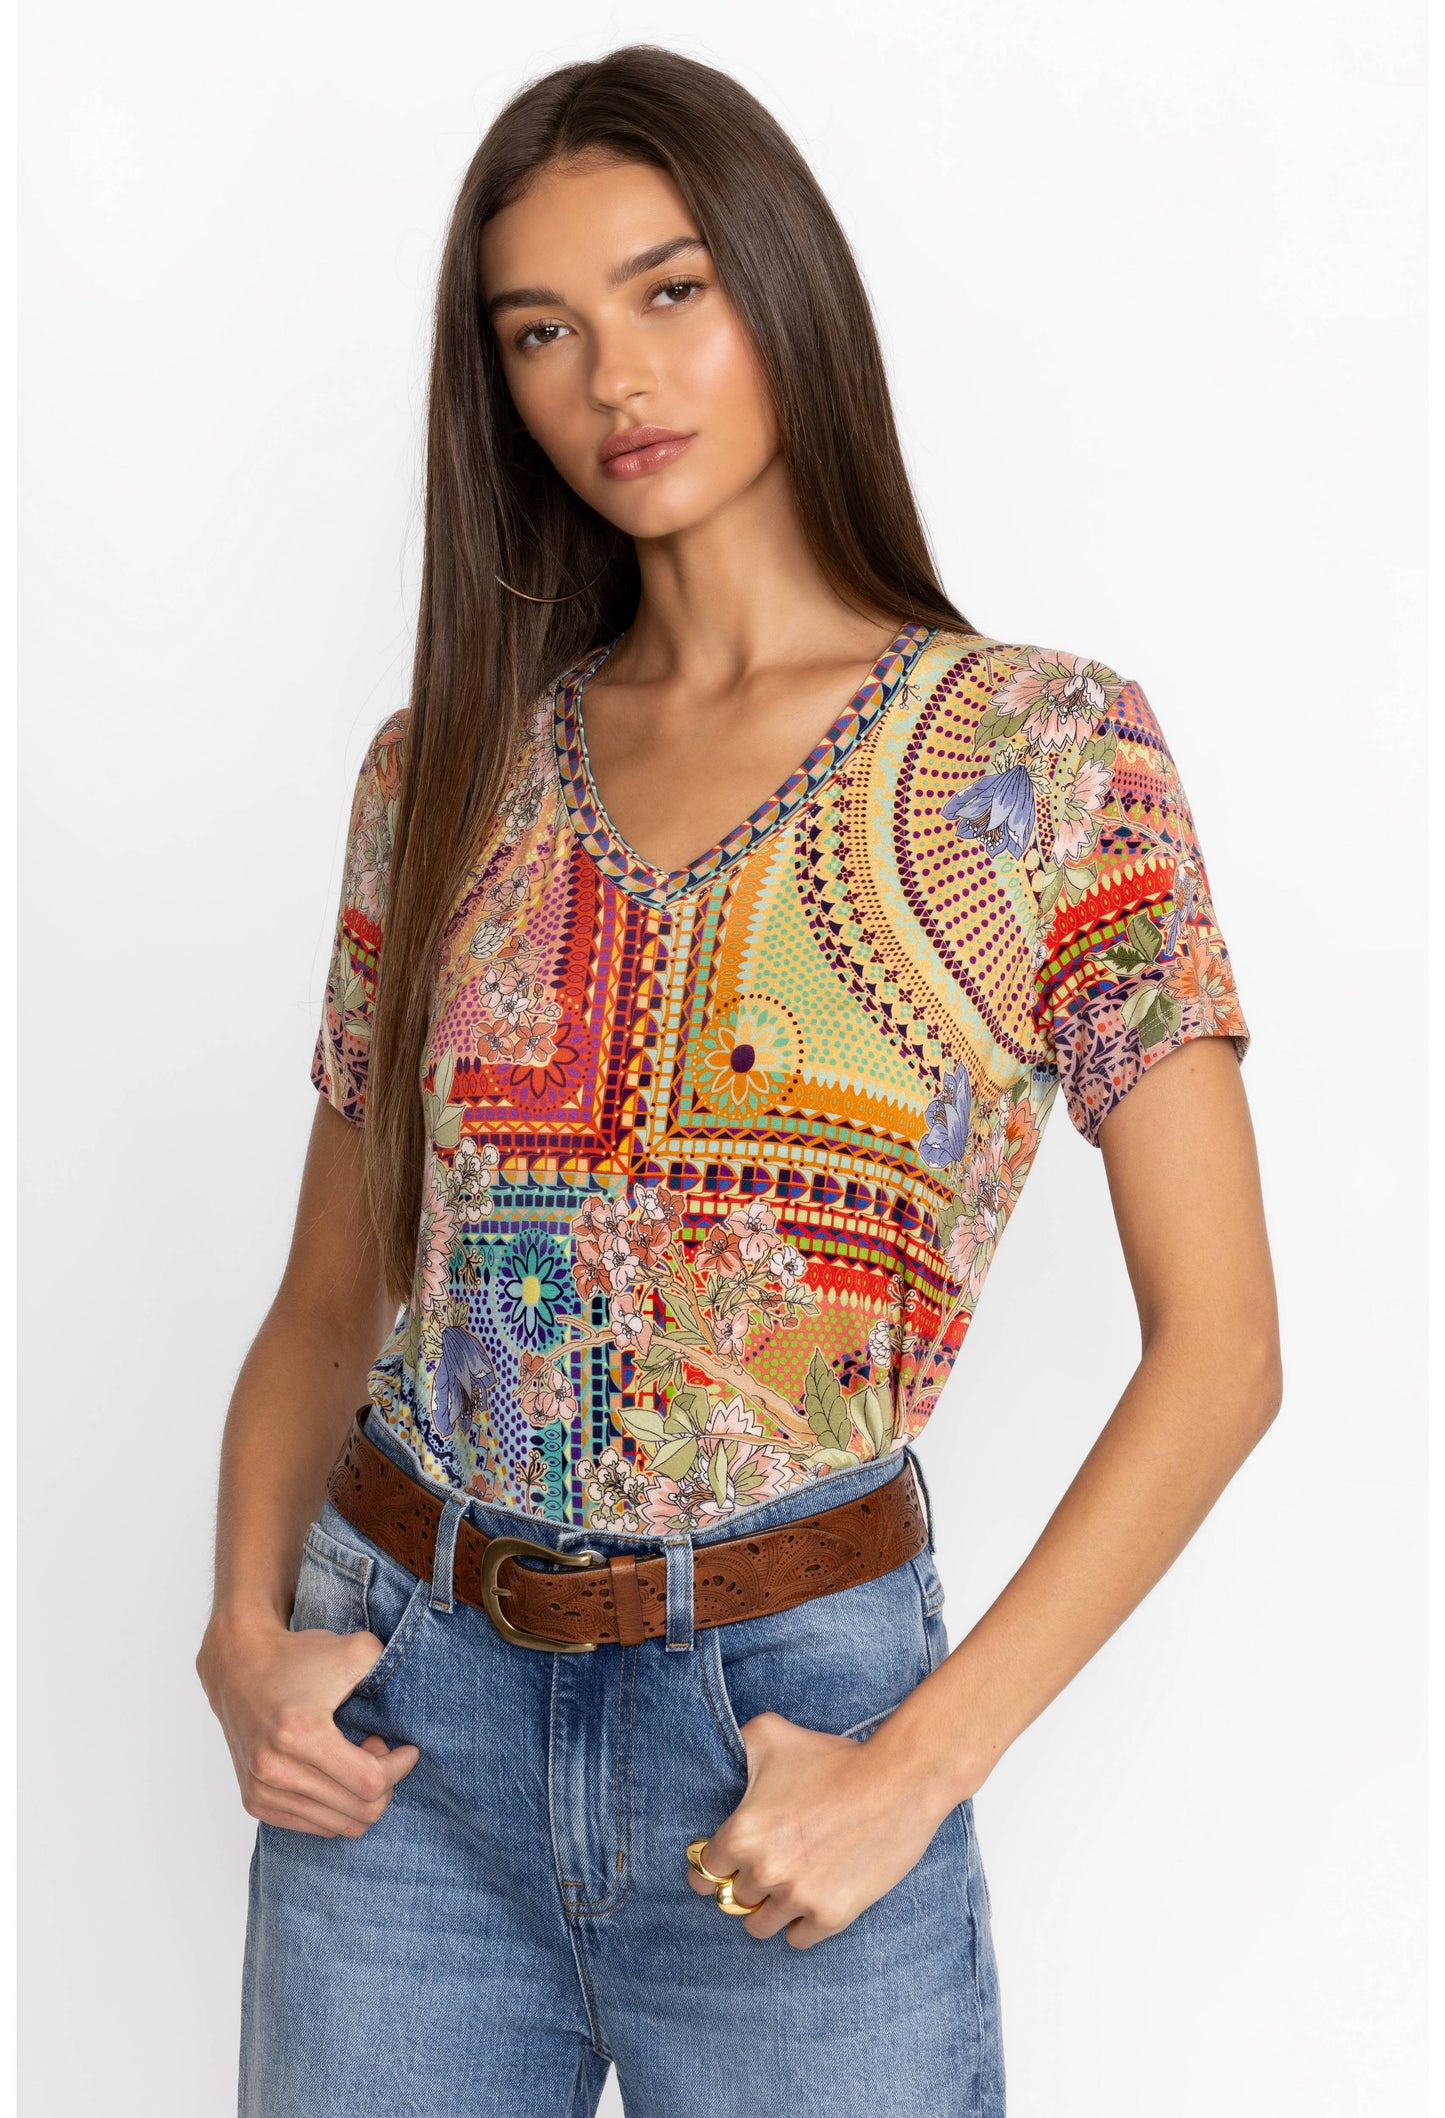 The Jaine Favorite Short Sleeve V-Neck Tee by Johnny Was in Mosaic